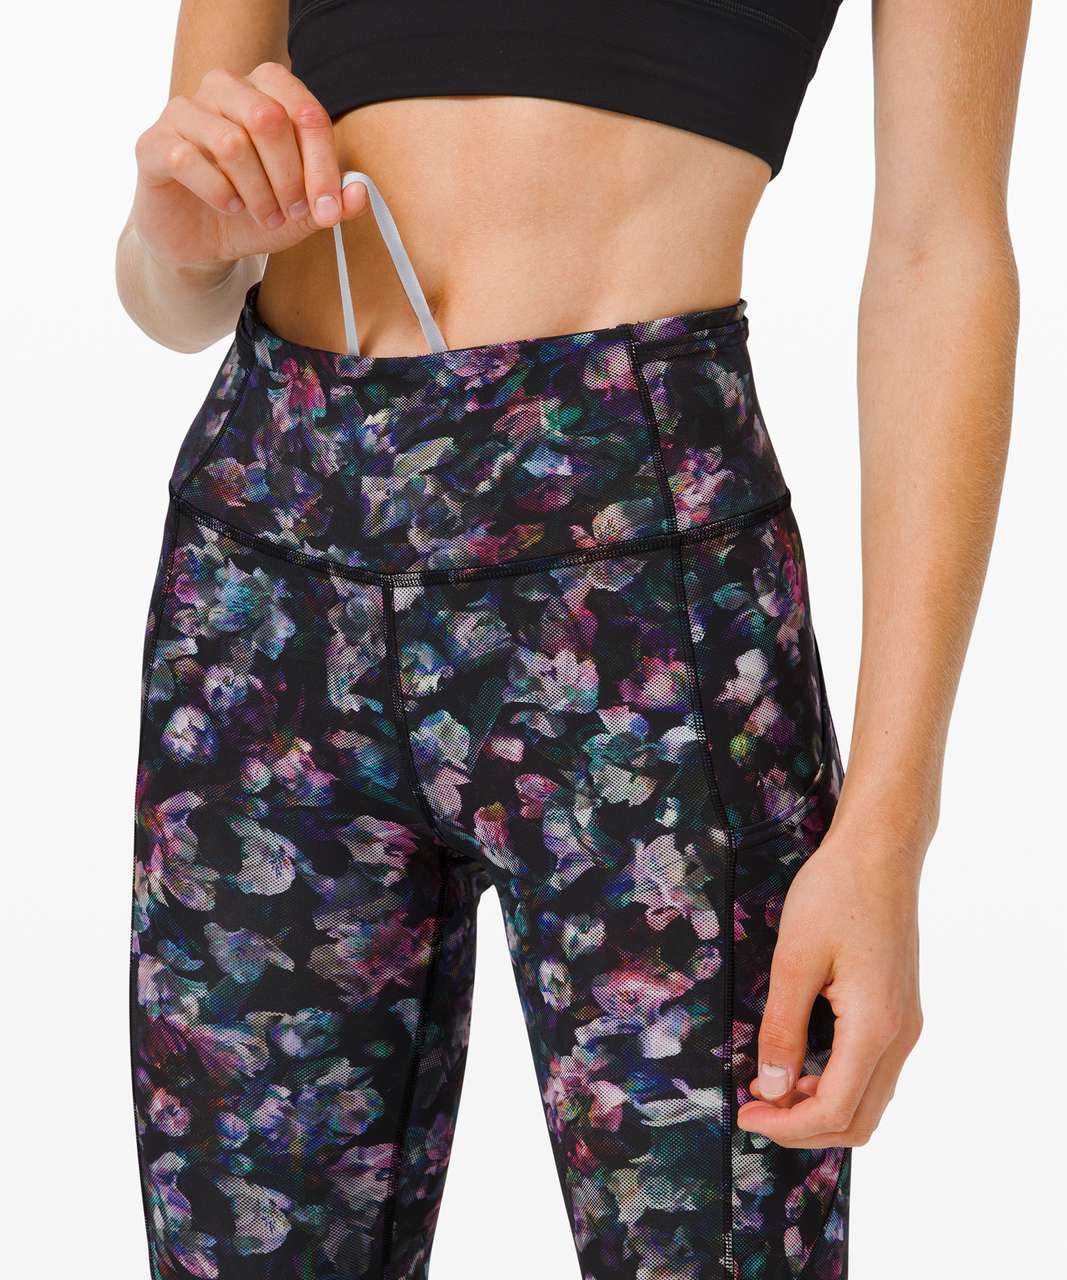 Lululemon Fast and Free Tight II 25" *Non-Reflective Nulux - Activate Floral Multi